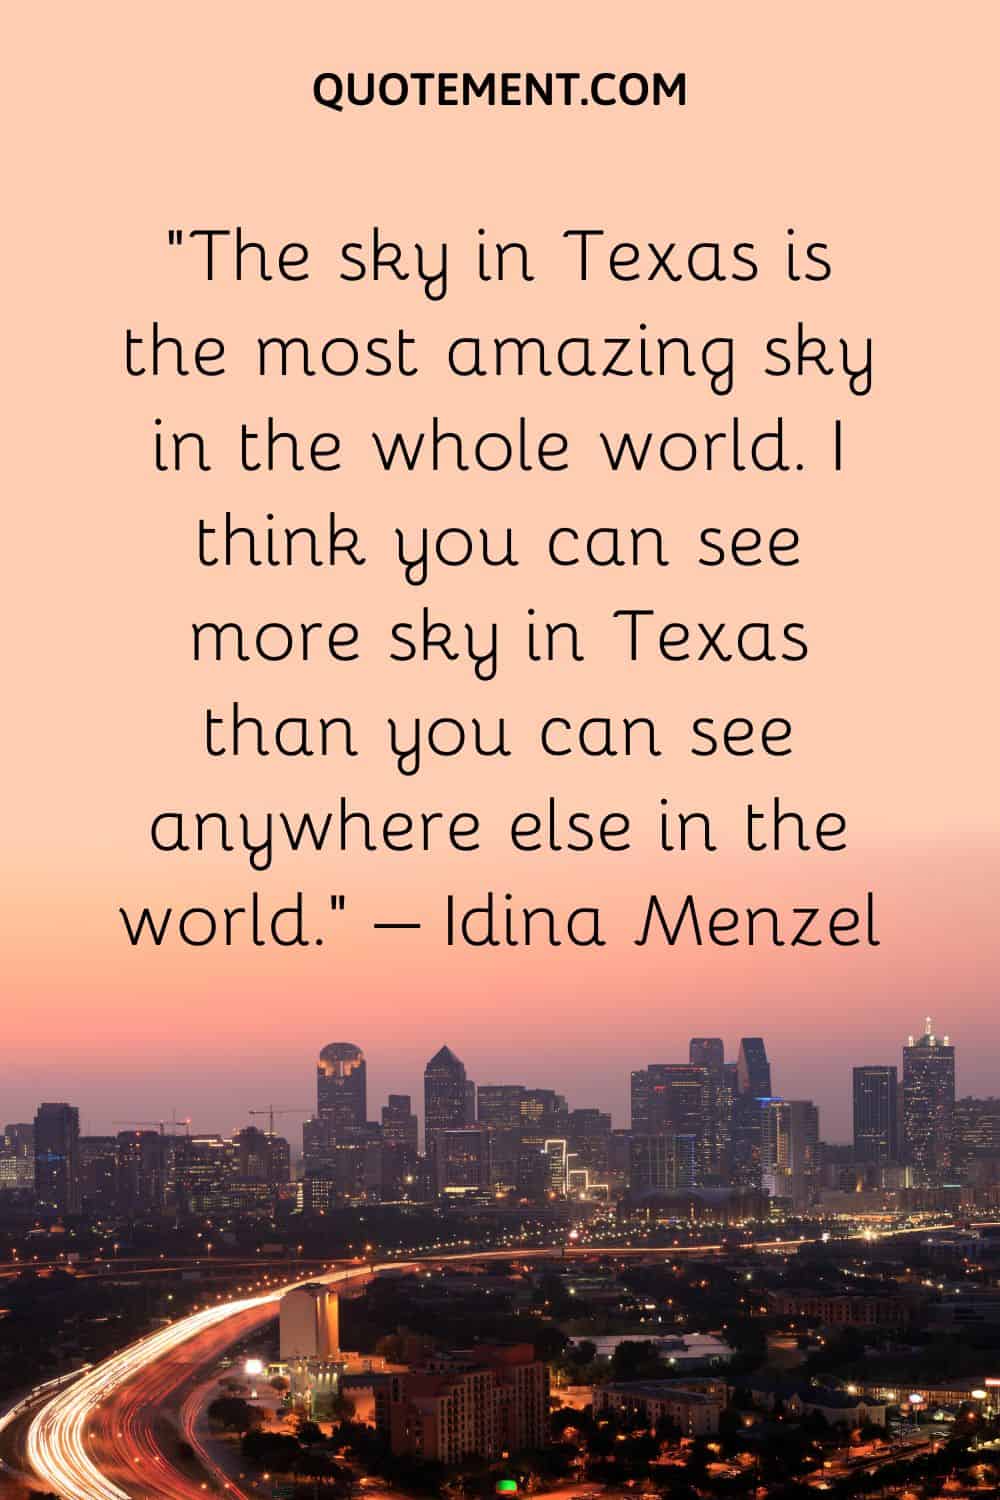 The sky in Texas is the most amazing sky in the whole world. I think you can see more sky in Texas than you can see anywhere else in the world. – Idina Menzel